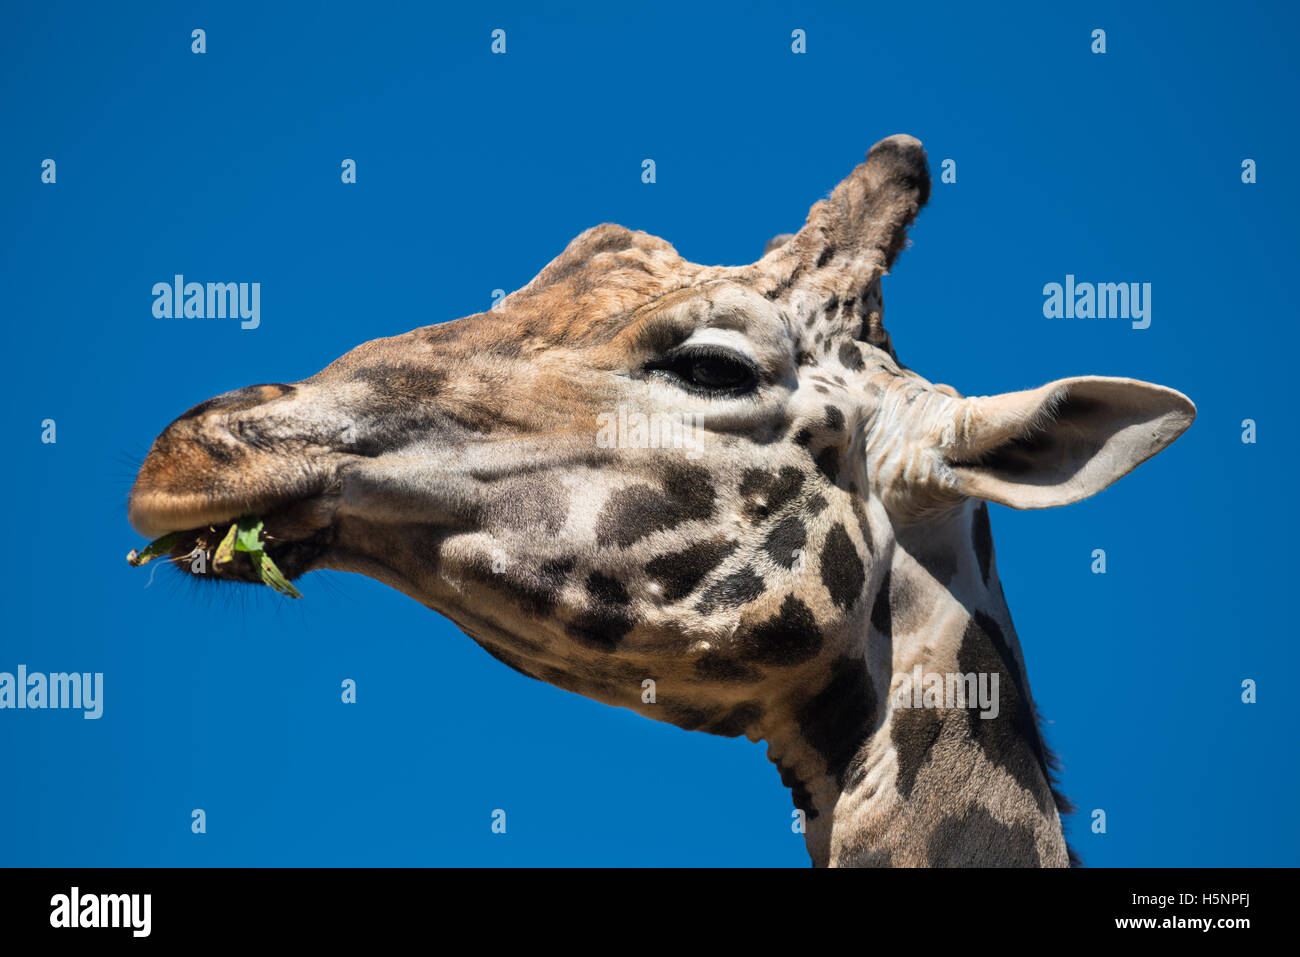 Close up view of a Giraffe eating Stock Photo